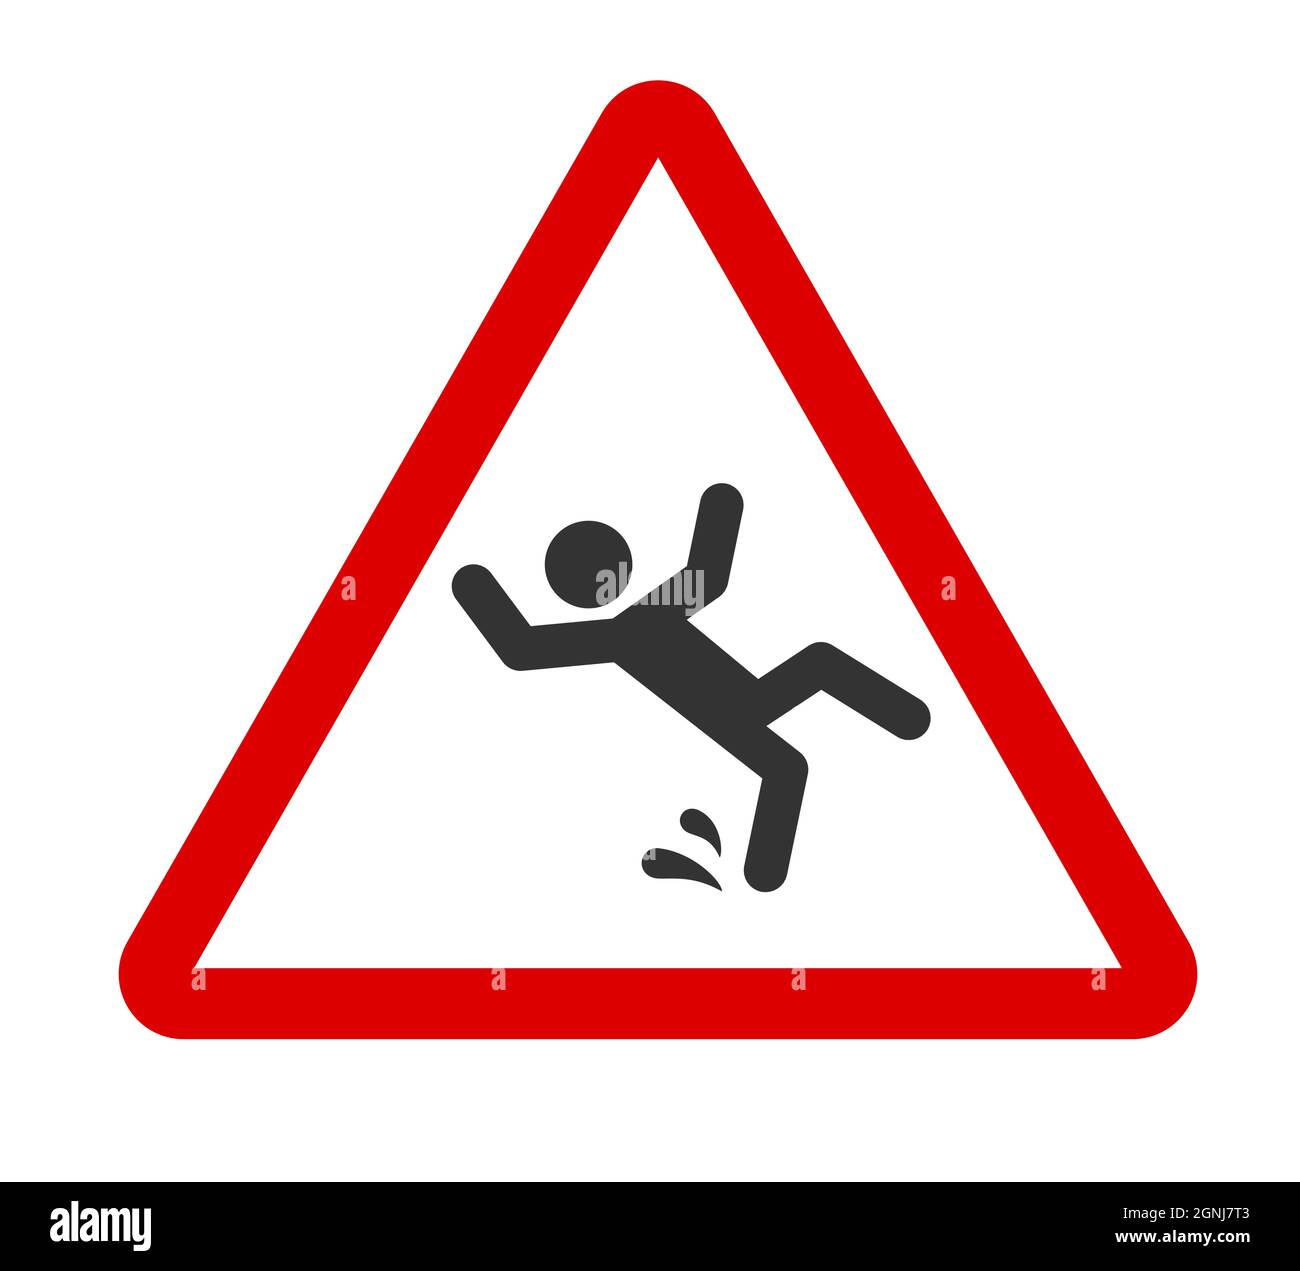 Caution wet floor sign. A man falling down icon in red triangle. Slippery floor. A sign warning of danger. Vector illustration isolated on white Stock Vector